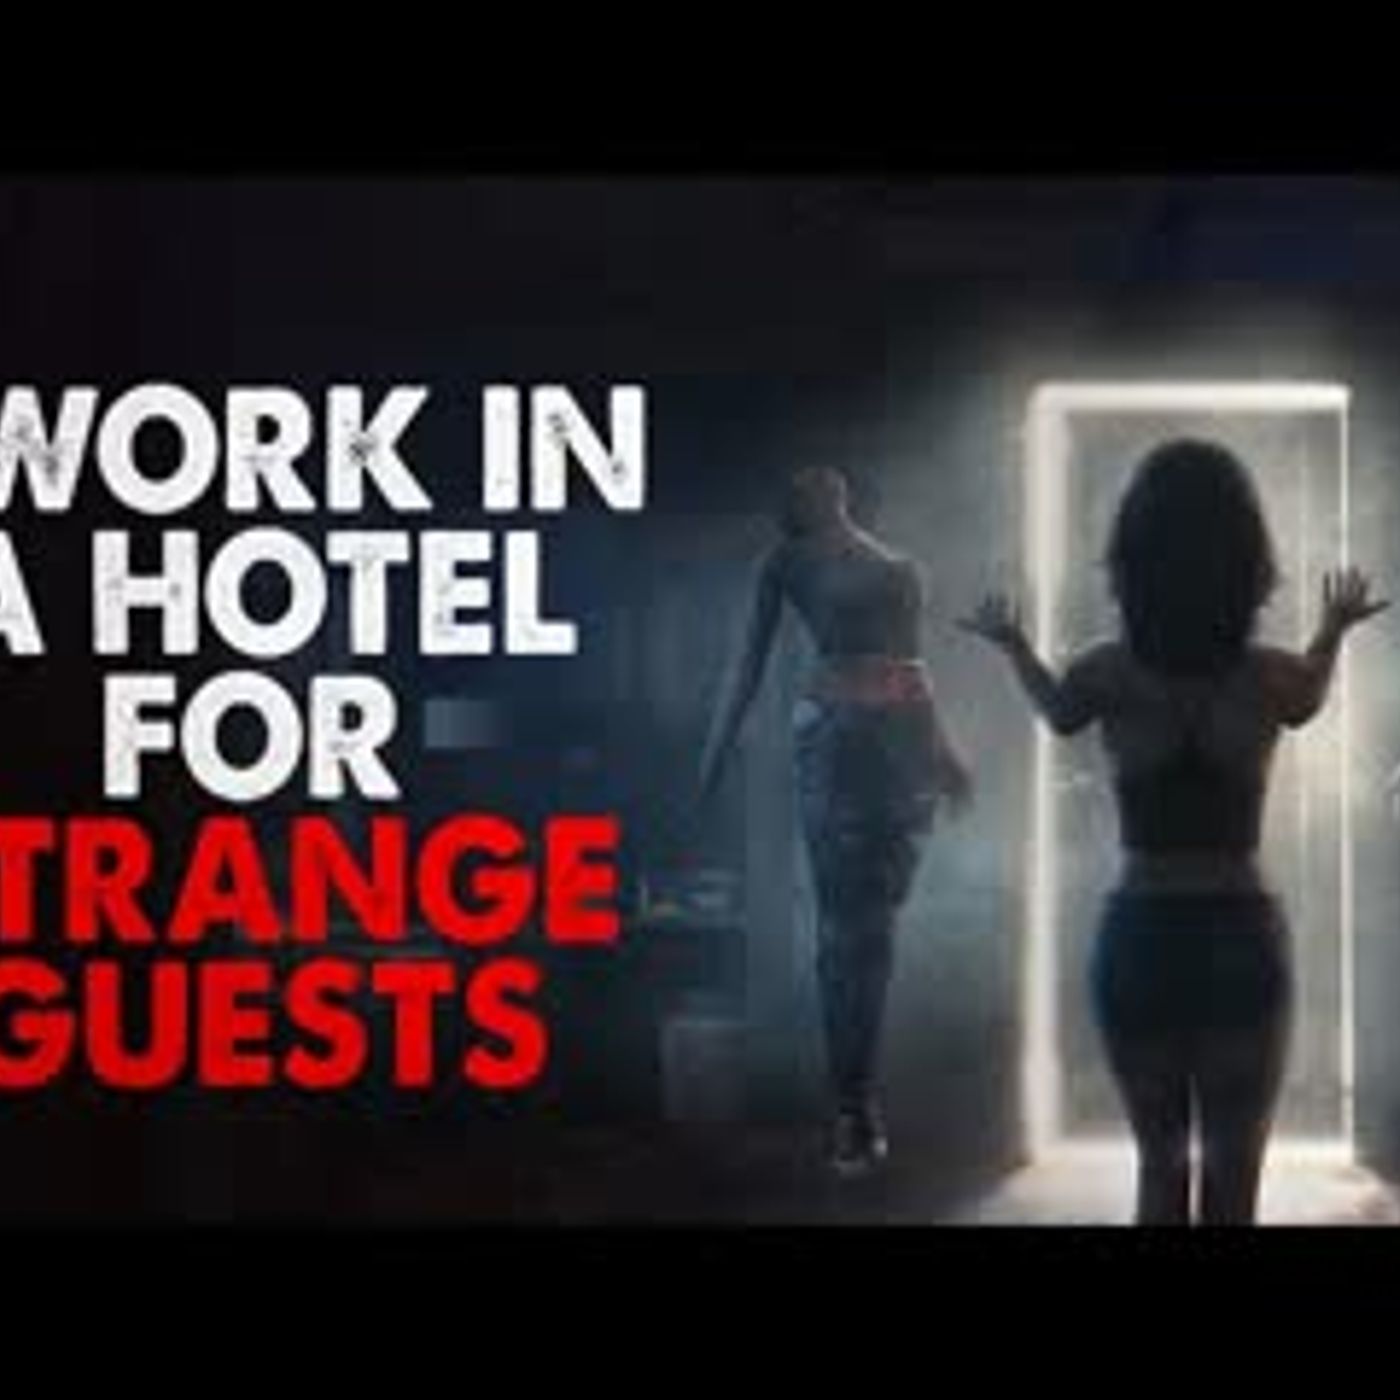 "I work in a hotel for strange guests. Here are some of my experiences" Creepypasta